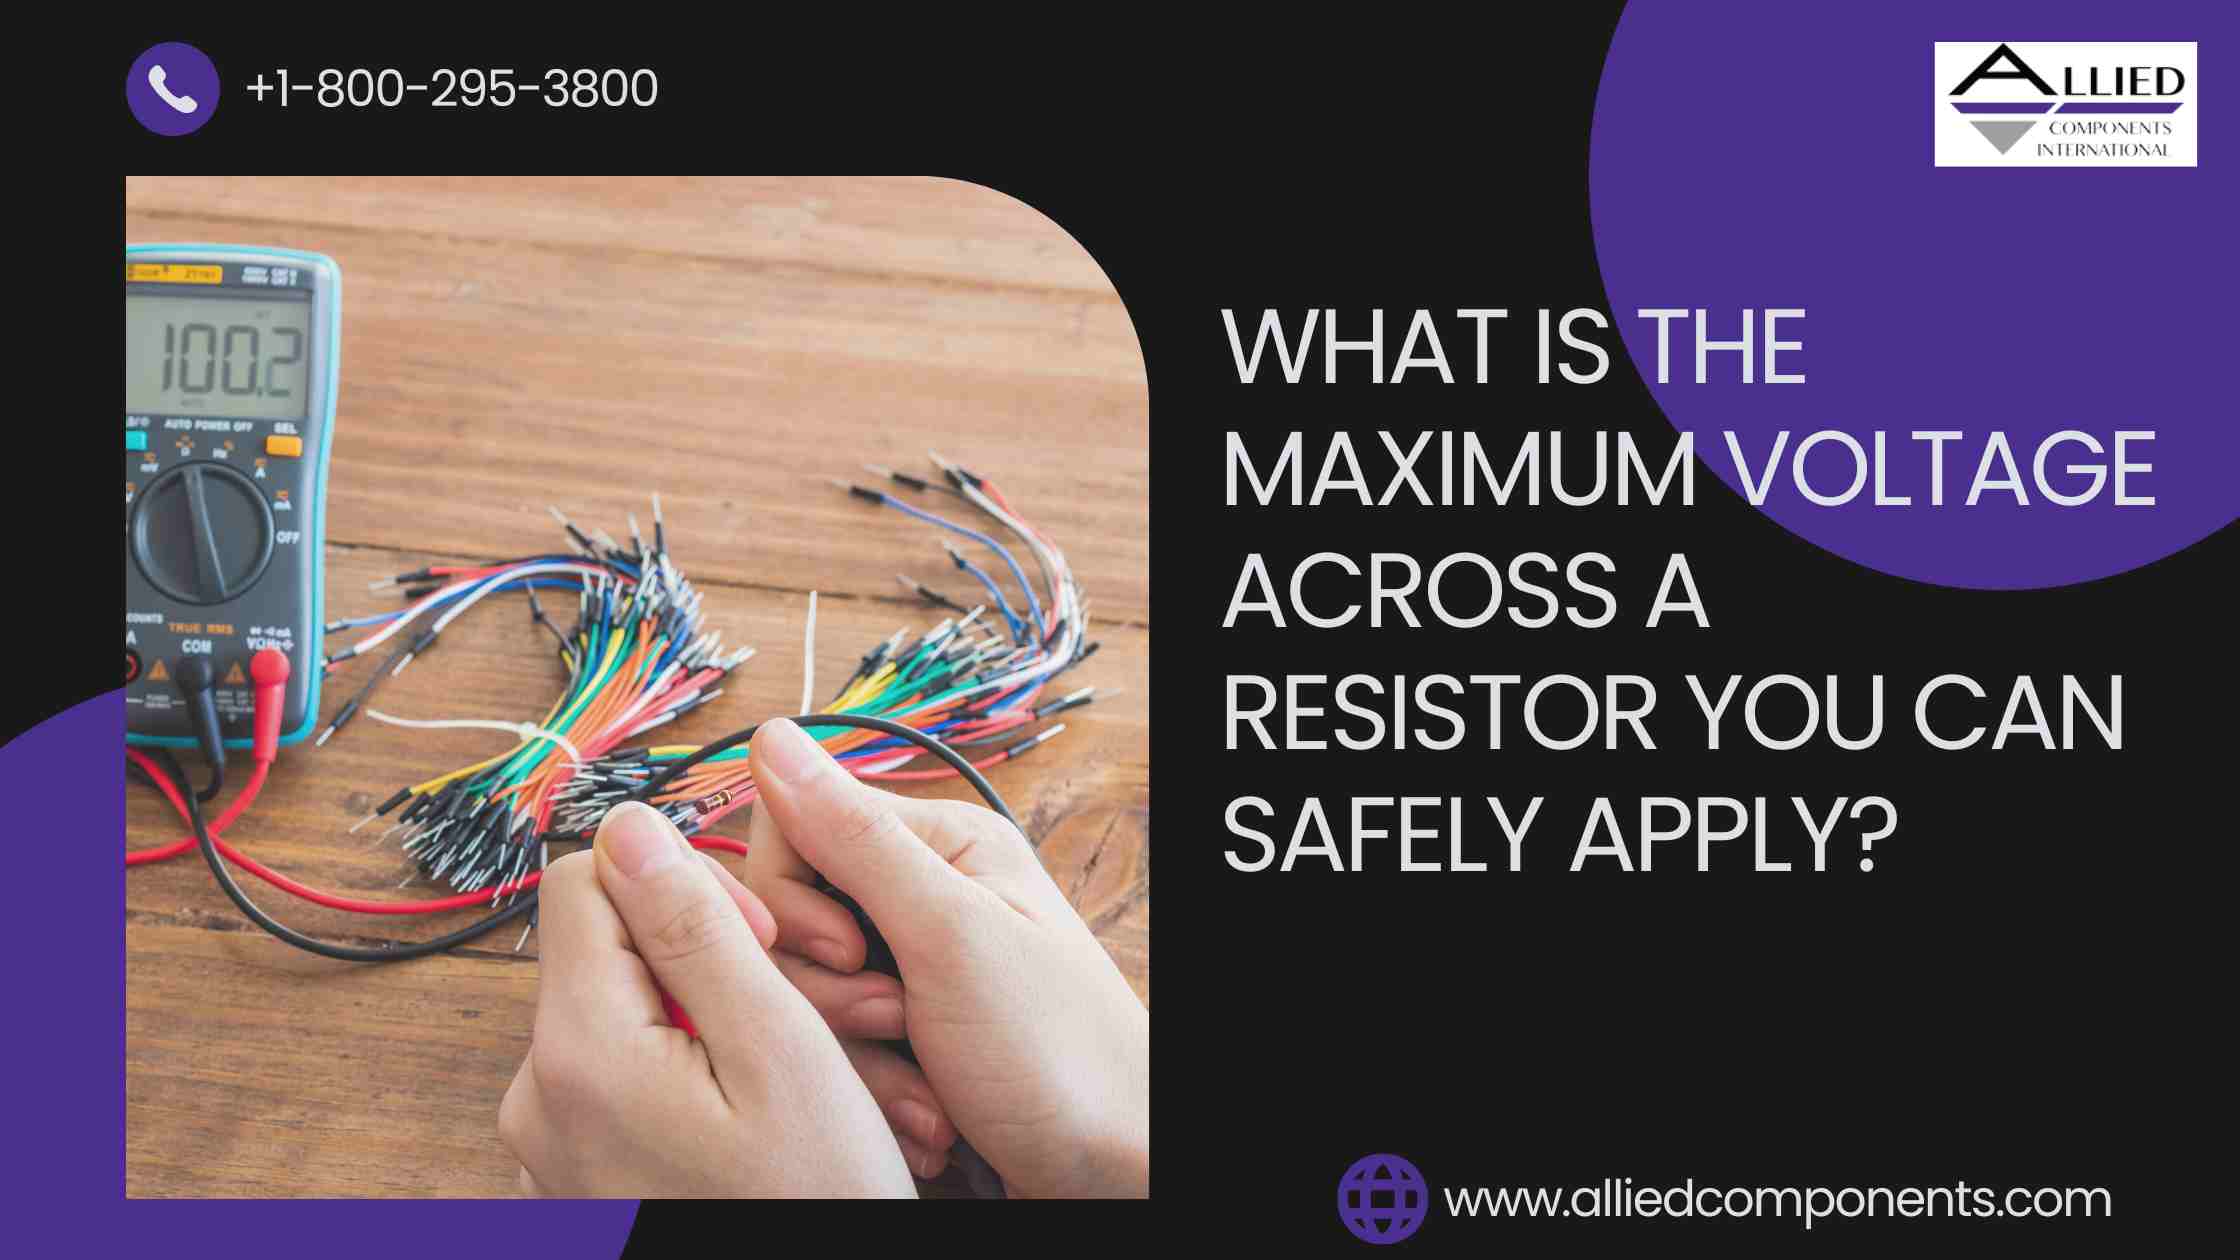 What Is the Maximum Voltage Across a Resistor You Can Safely Apply?